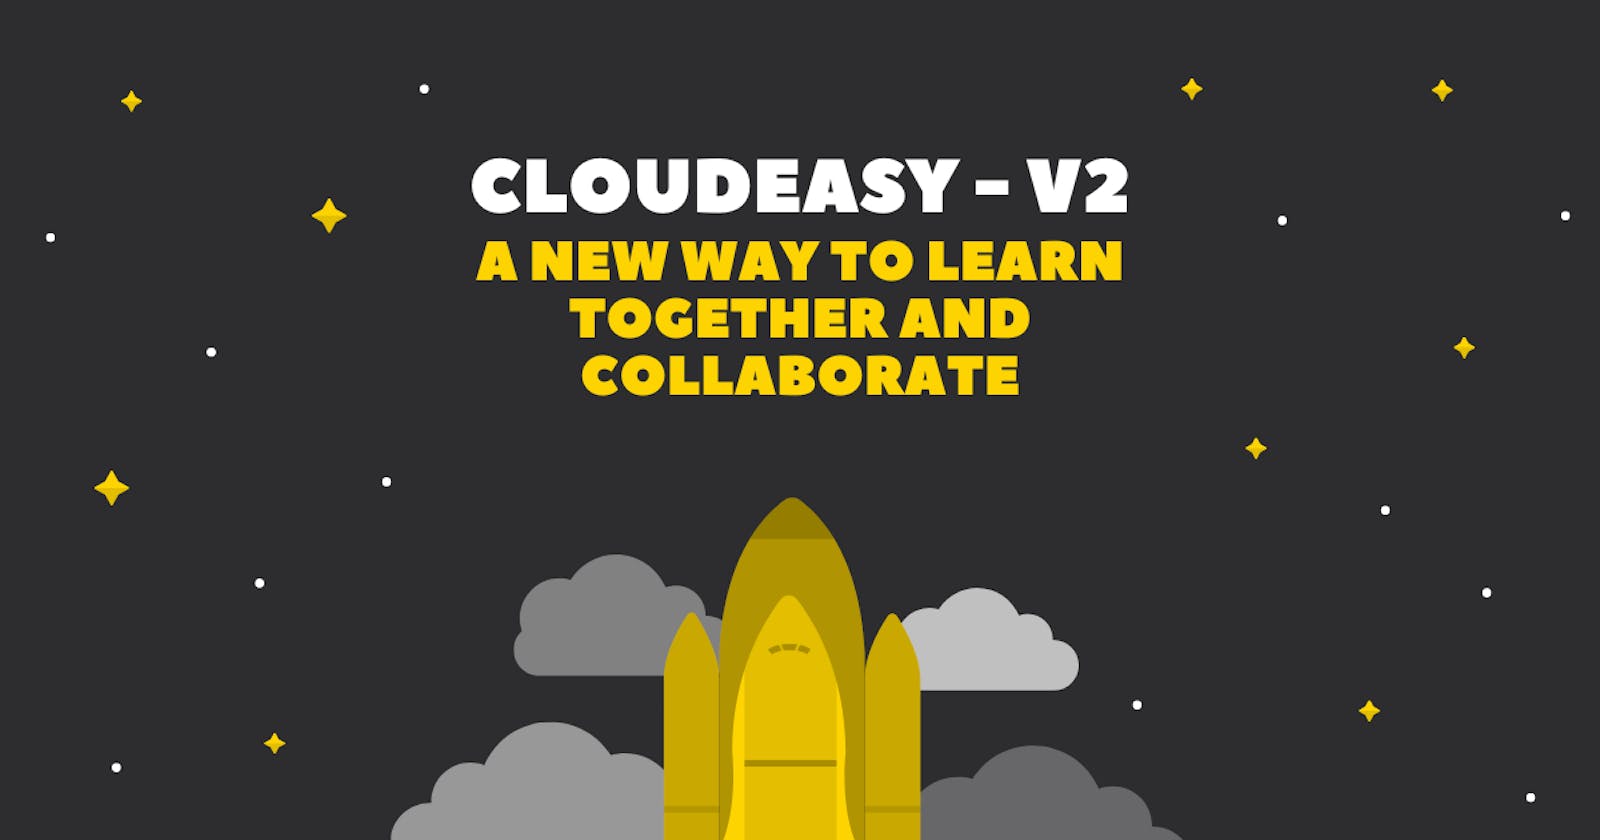 CloudEasy V2 - A new way to learn together and collaborate